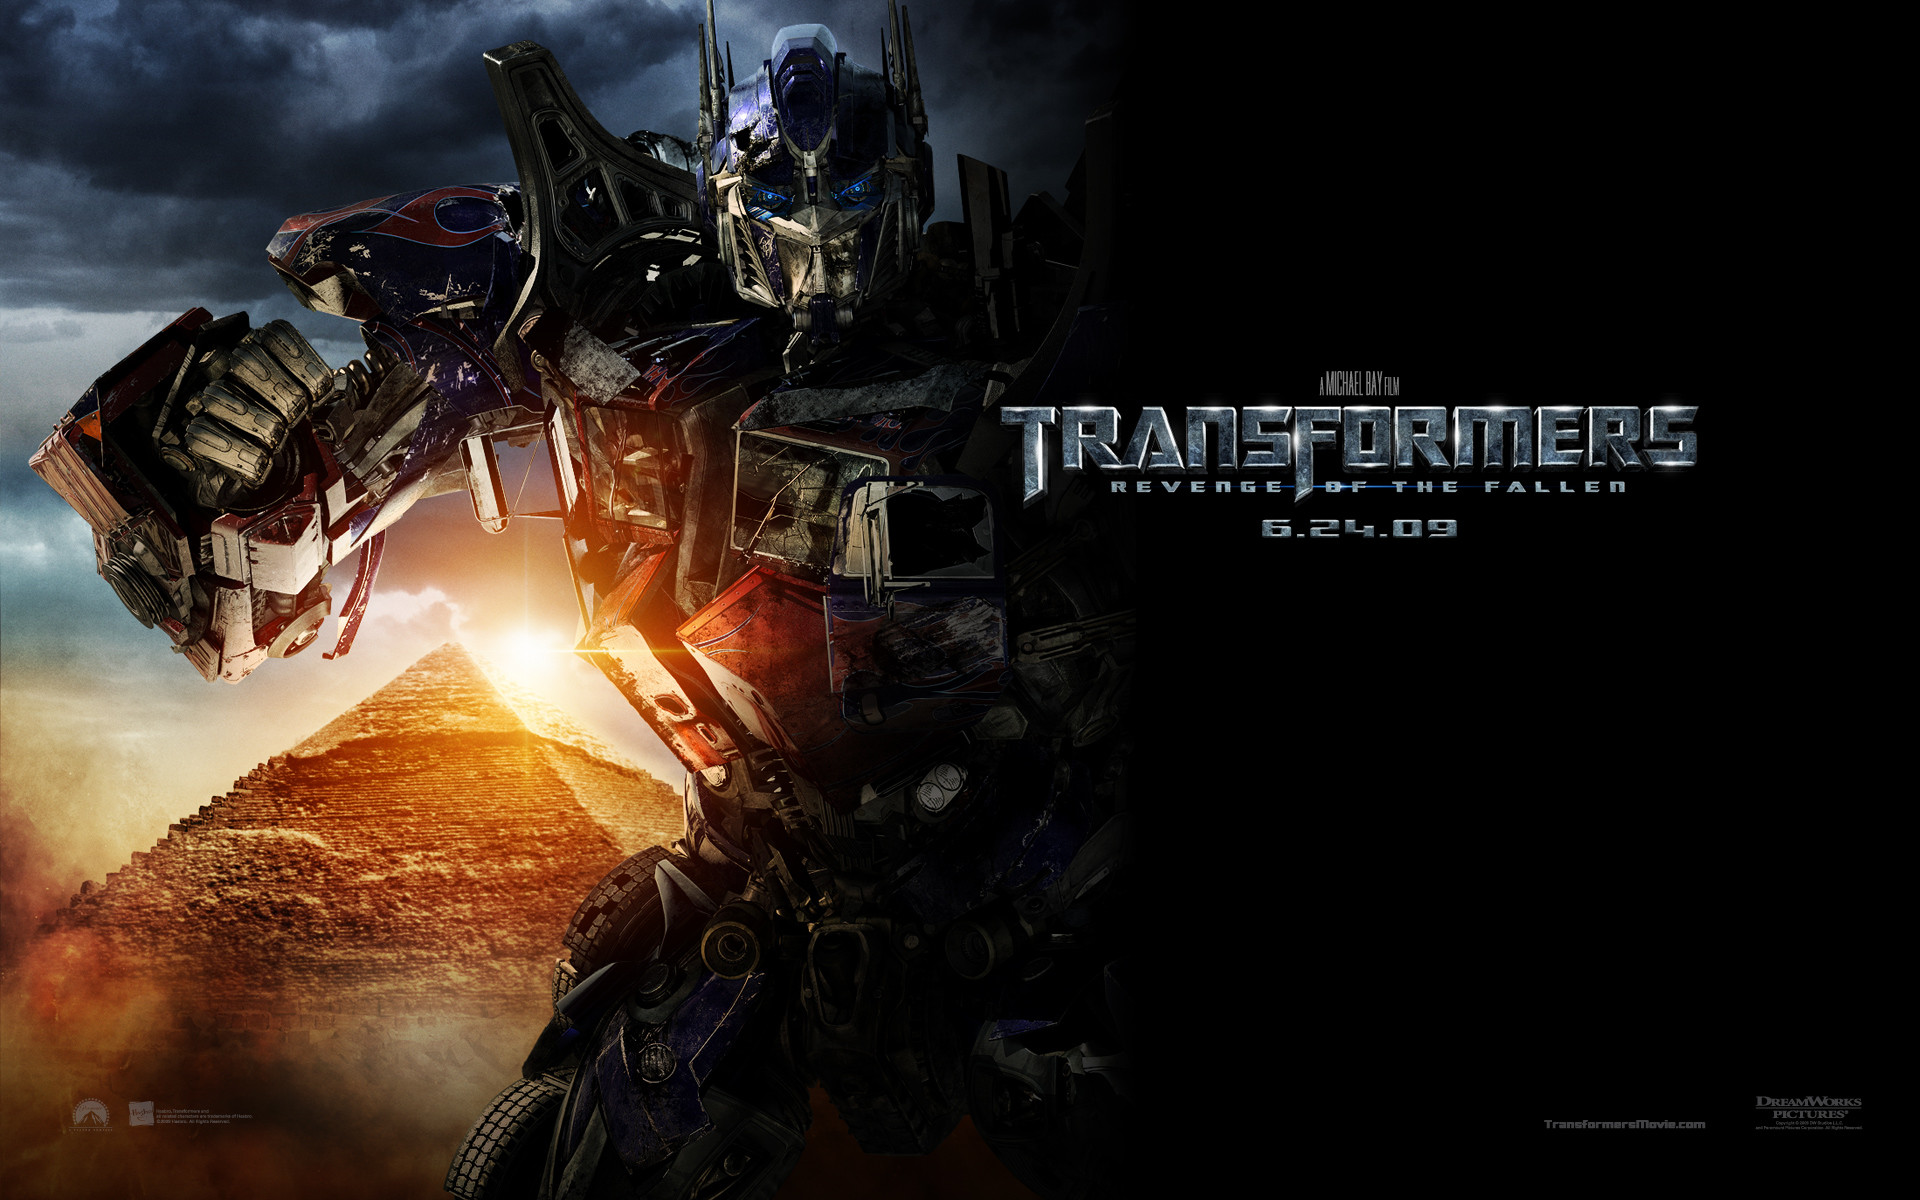 Movie Transformers Age Of Extinction Transformers Optimus Prime HD Wallpaper  Fine Art Paper Print Wall Poster Print on Art Paper 13x19 Inches Paper  Print  Movies posters in India  Buy art